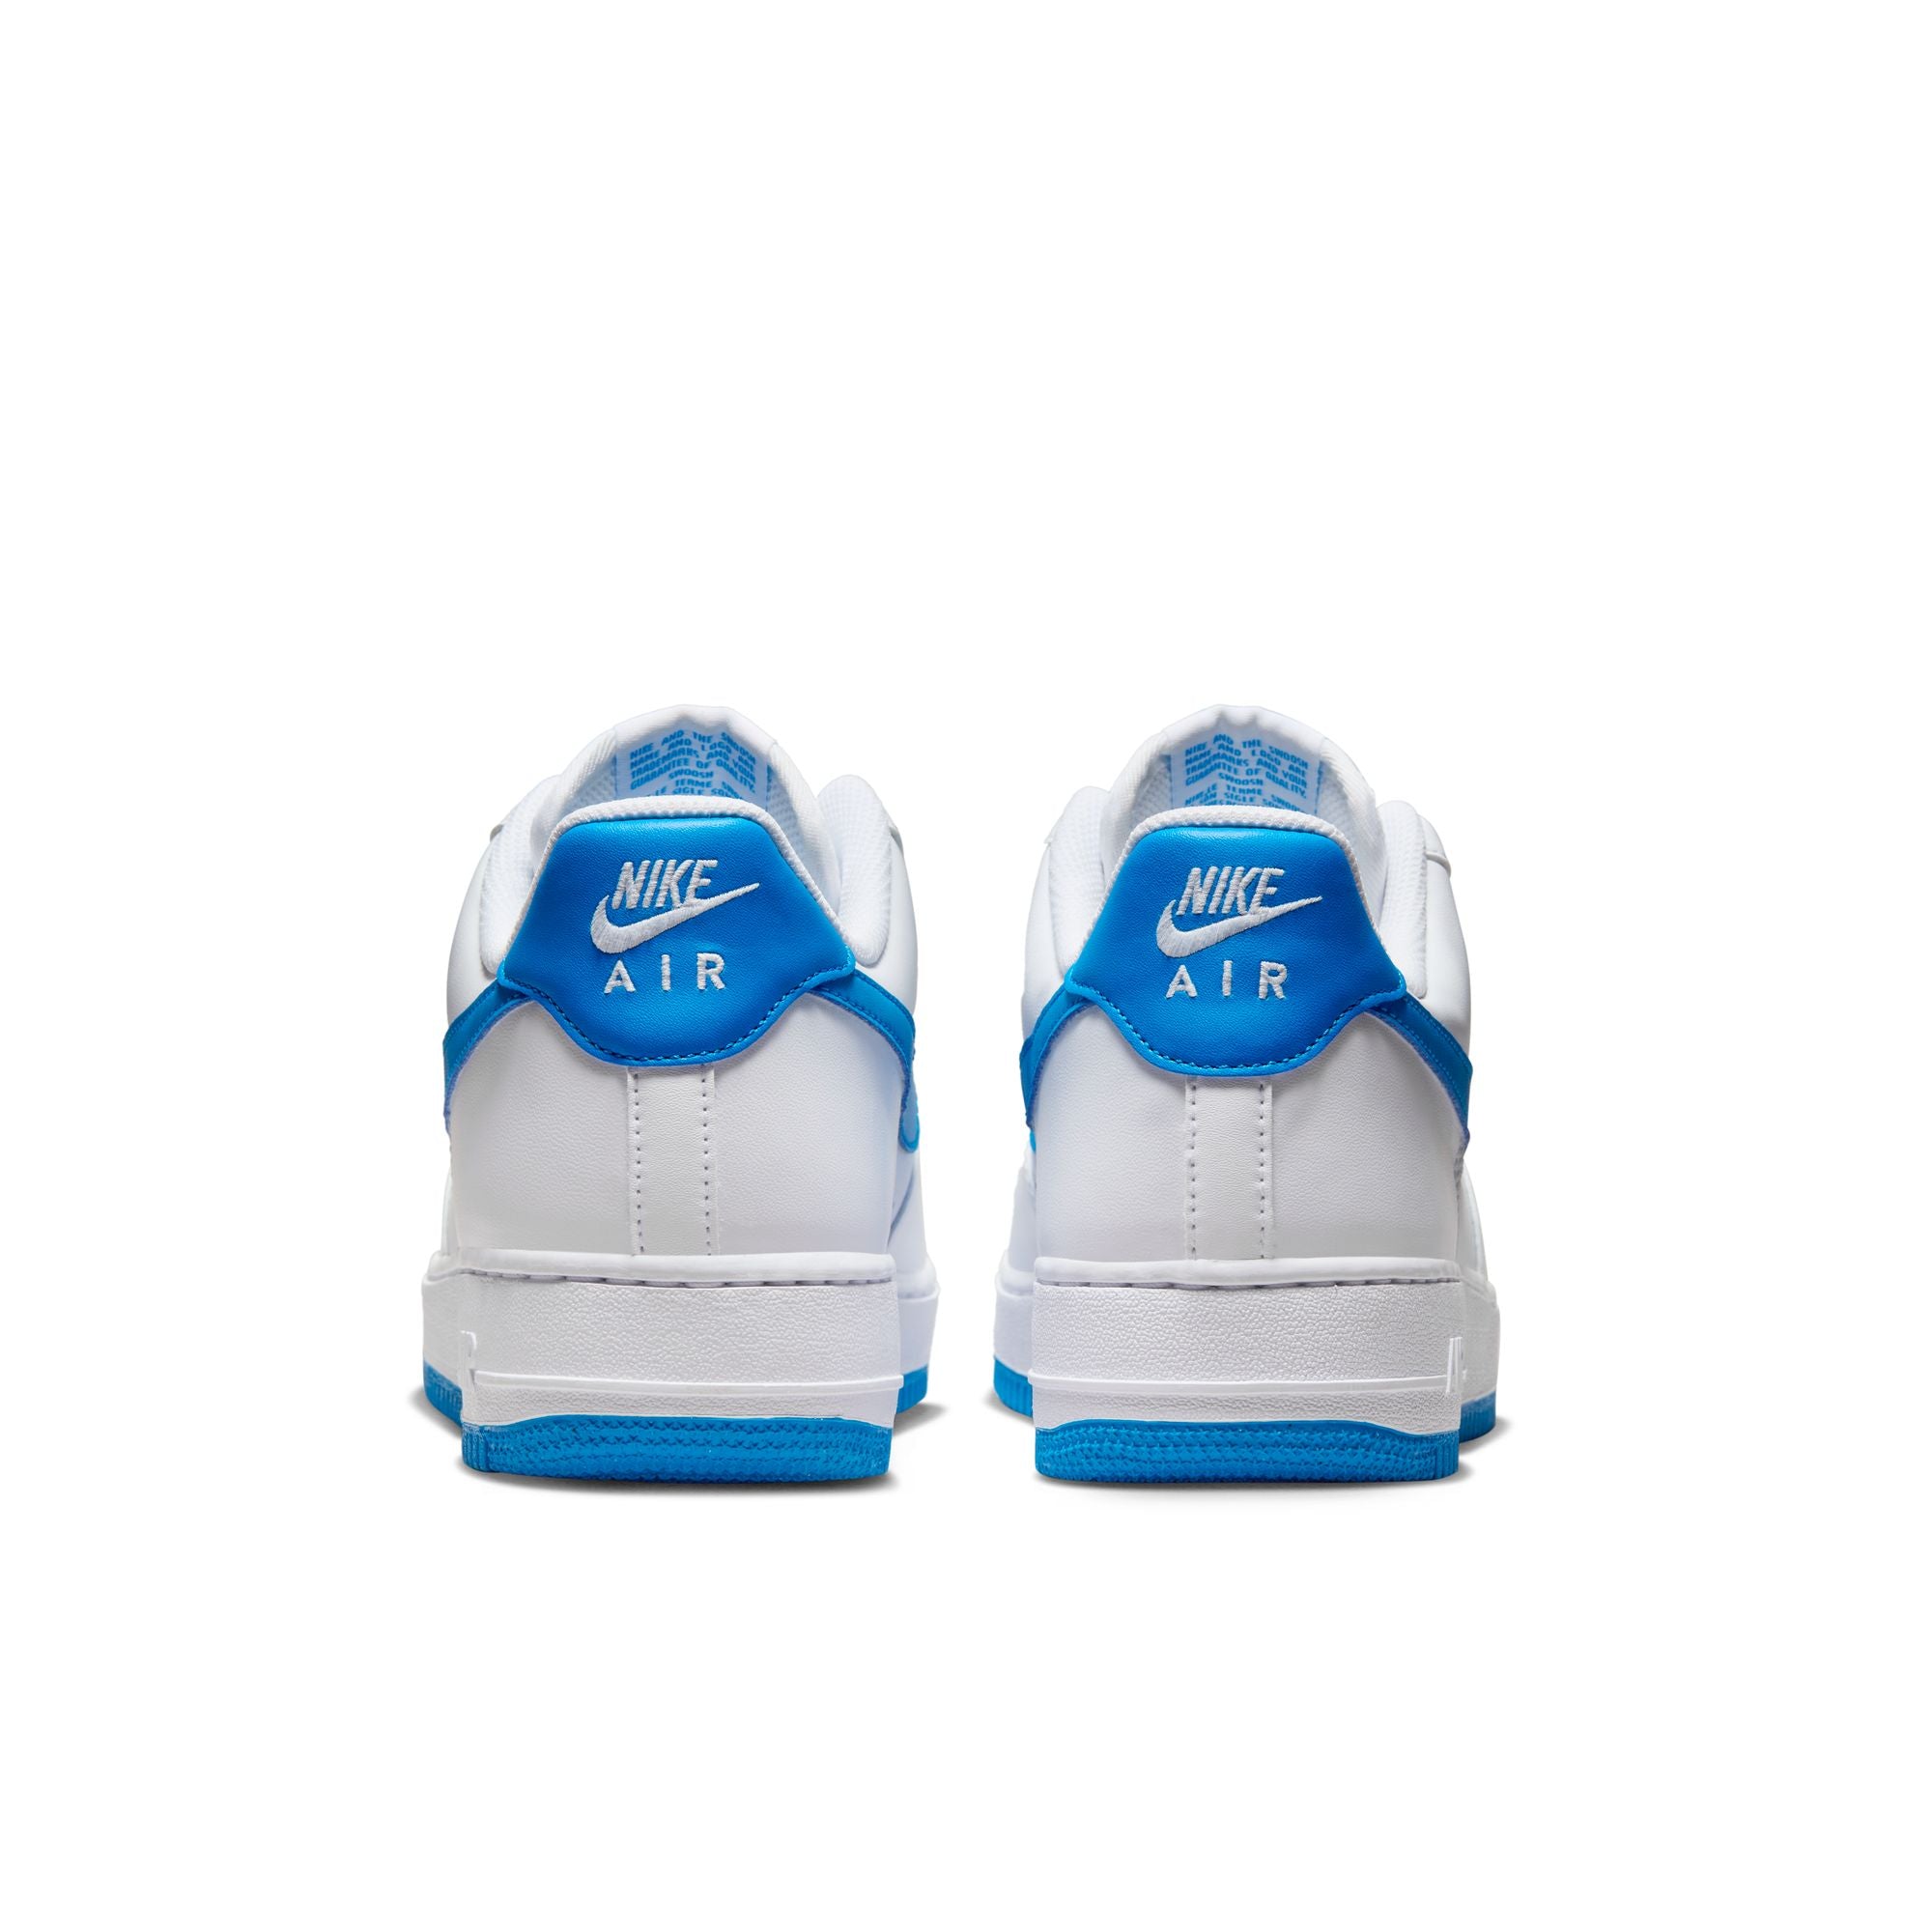 Nike Air Force 1 07' Low 'White/Photo Blue'